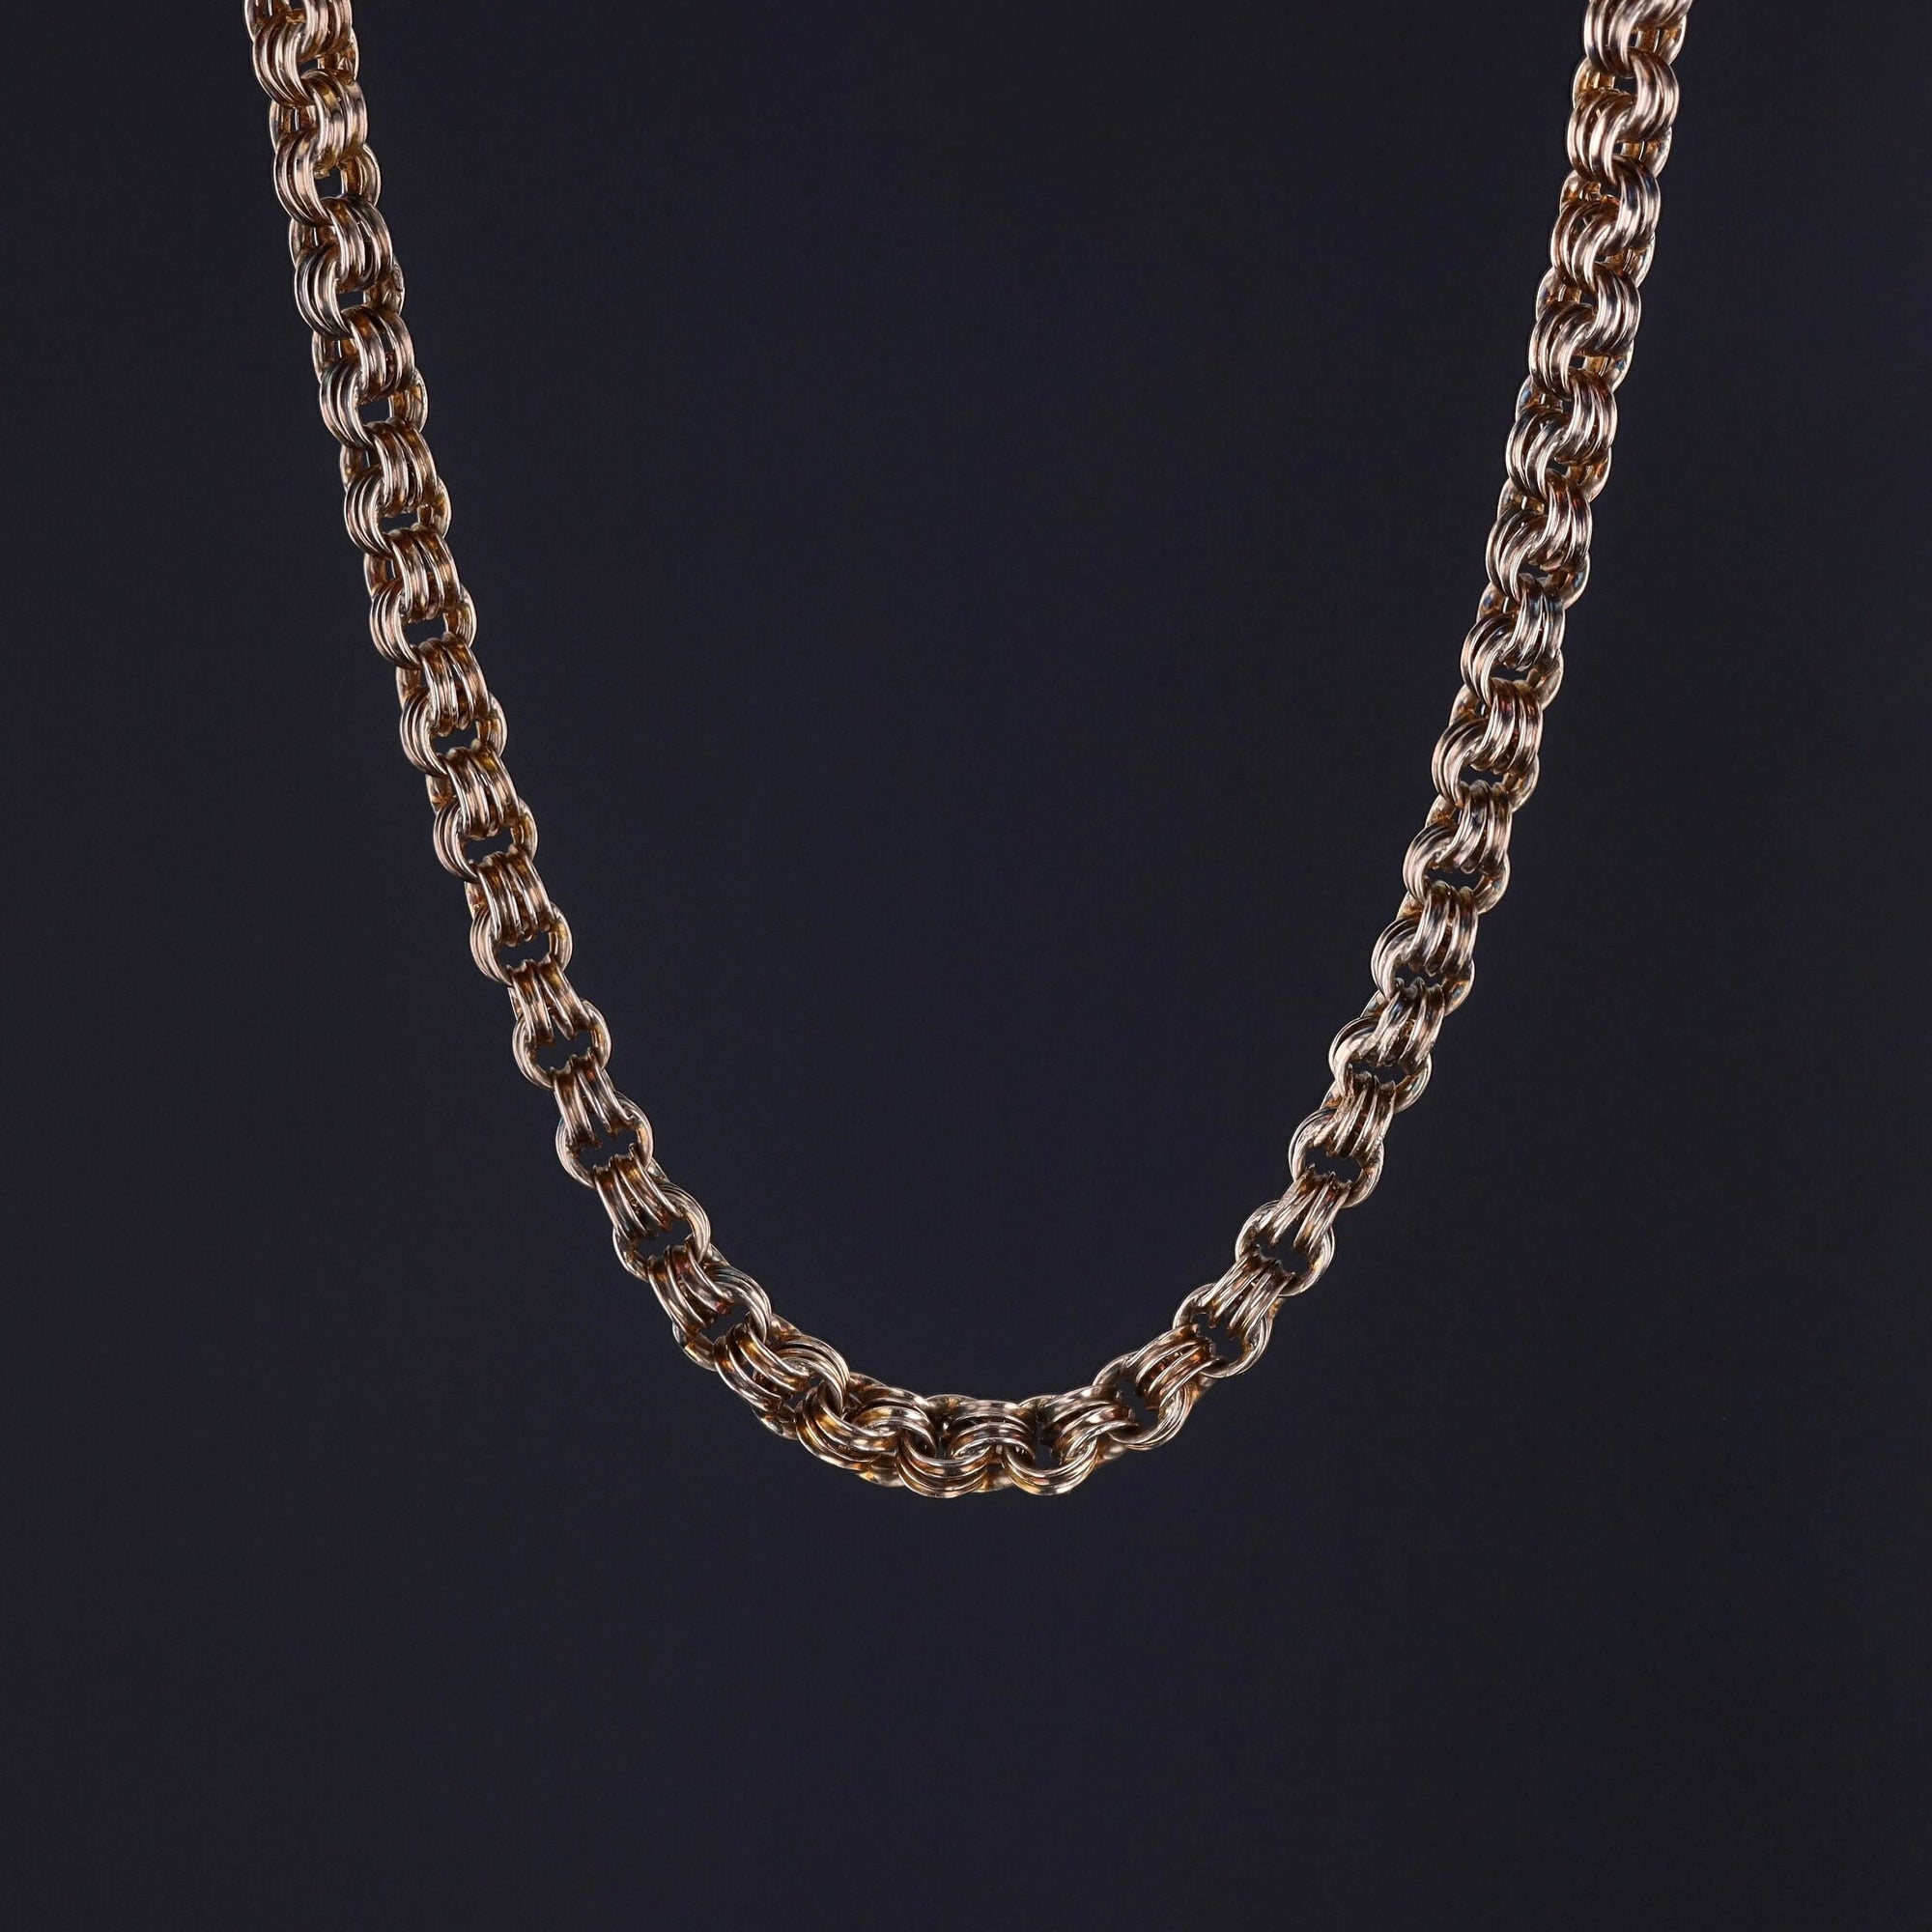 Antique Chain of 9ct Gold